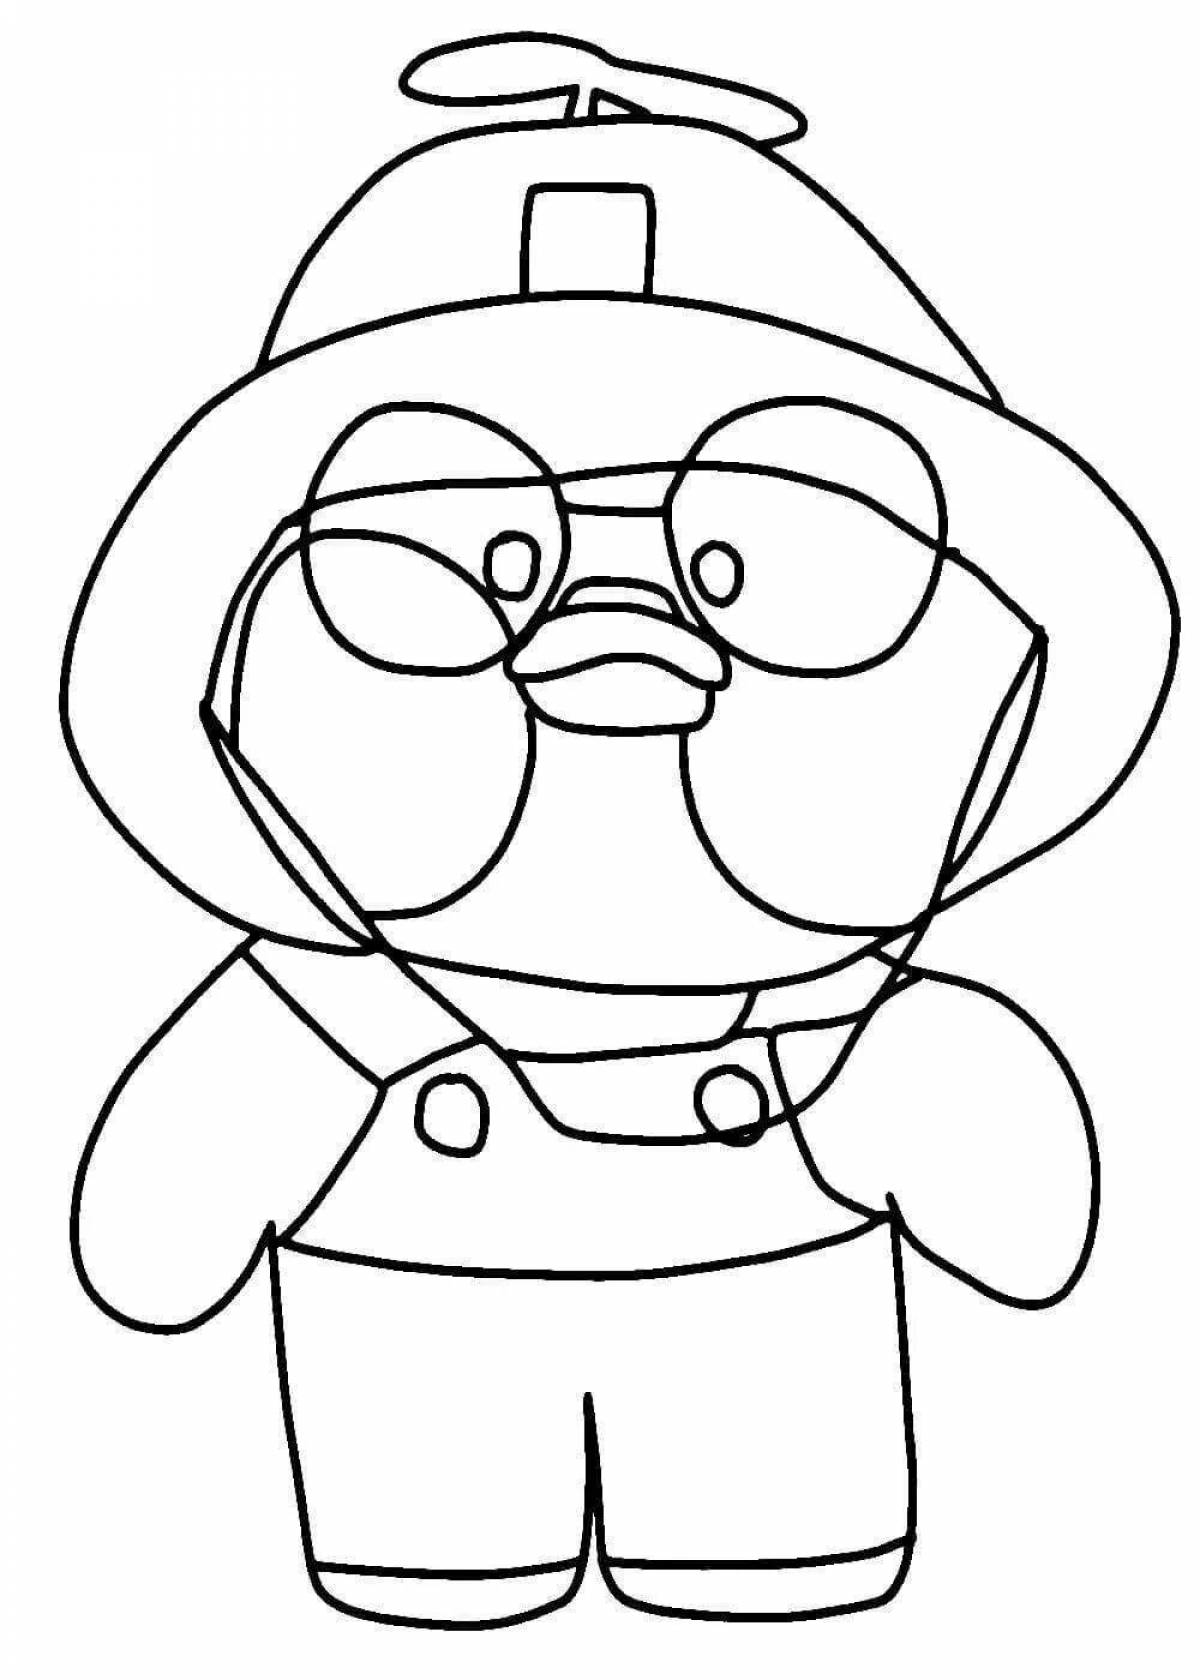 Lalofan duck coloring page